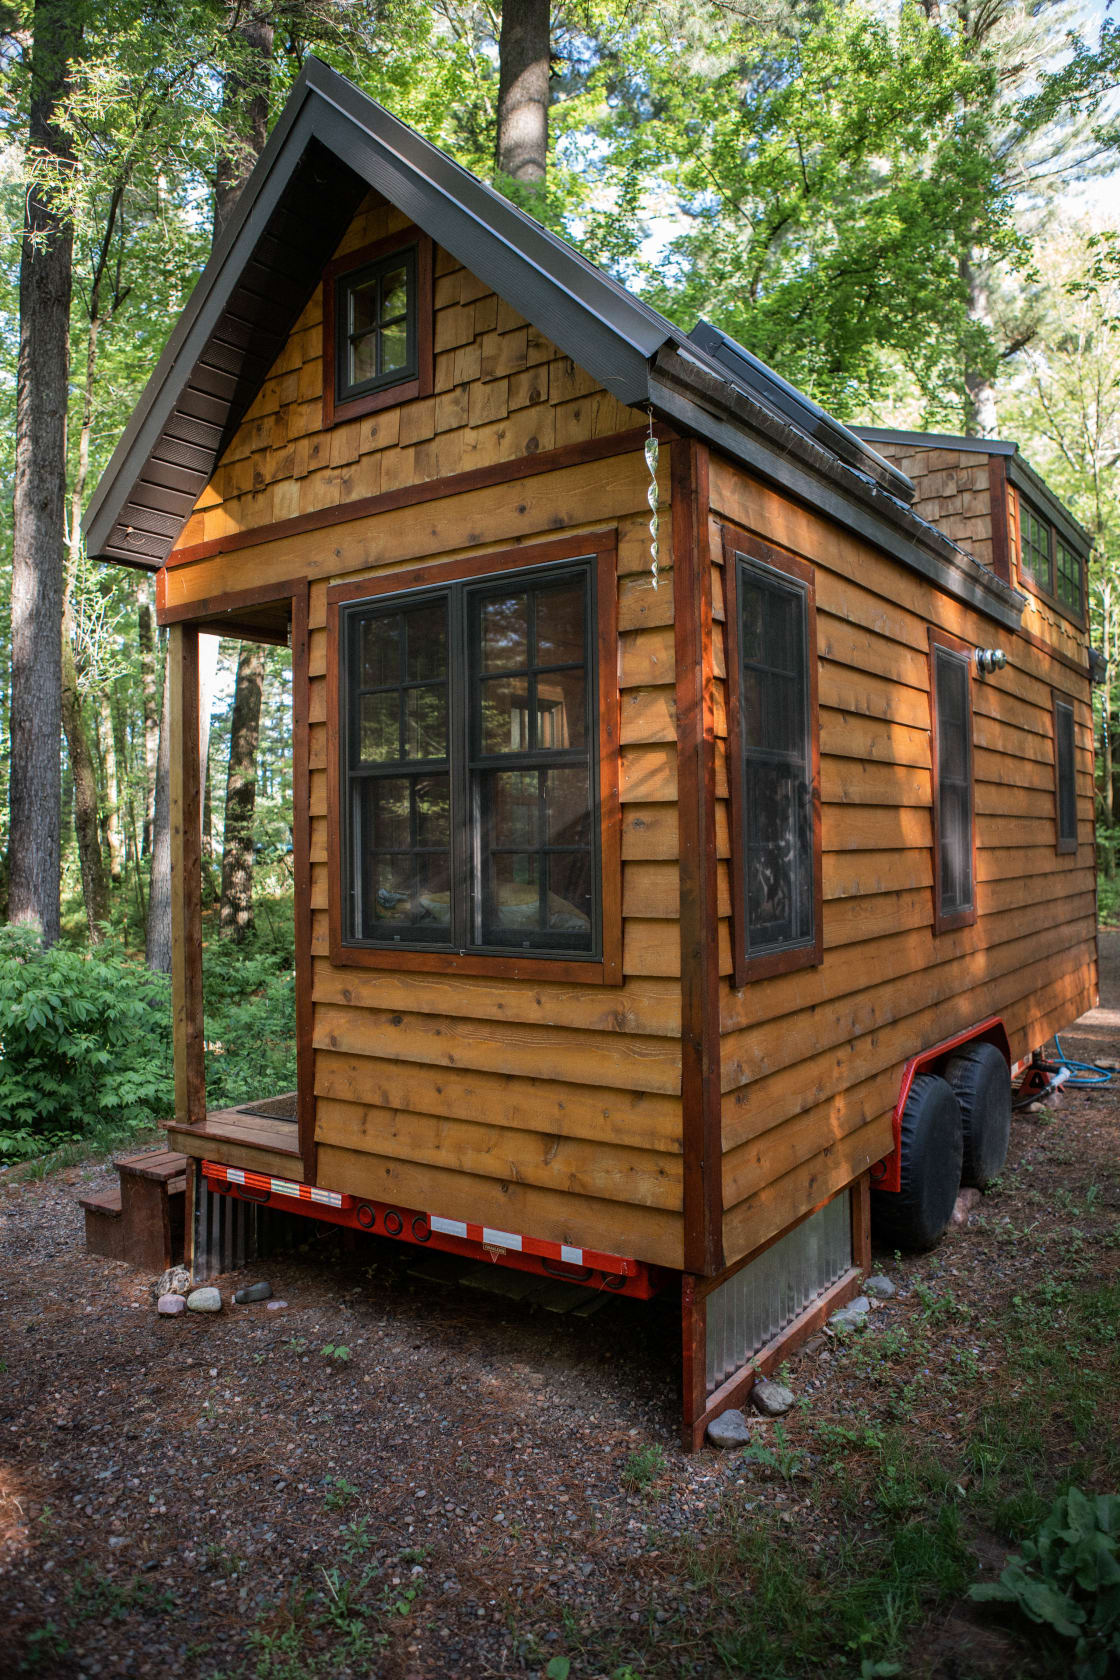 Here are a couple shots of the exterior of the tiny house! So cute!